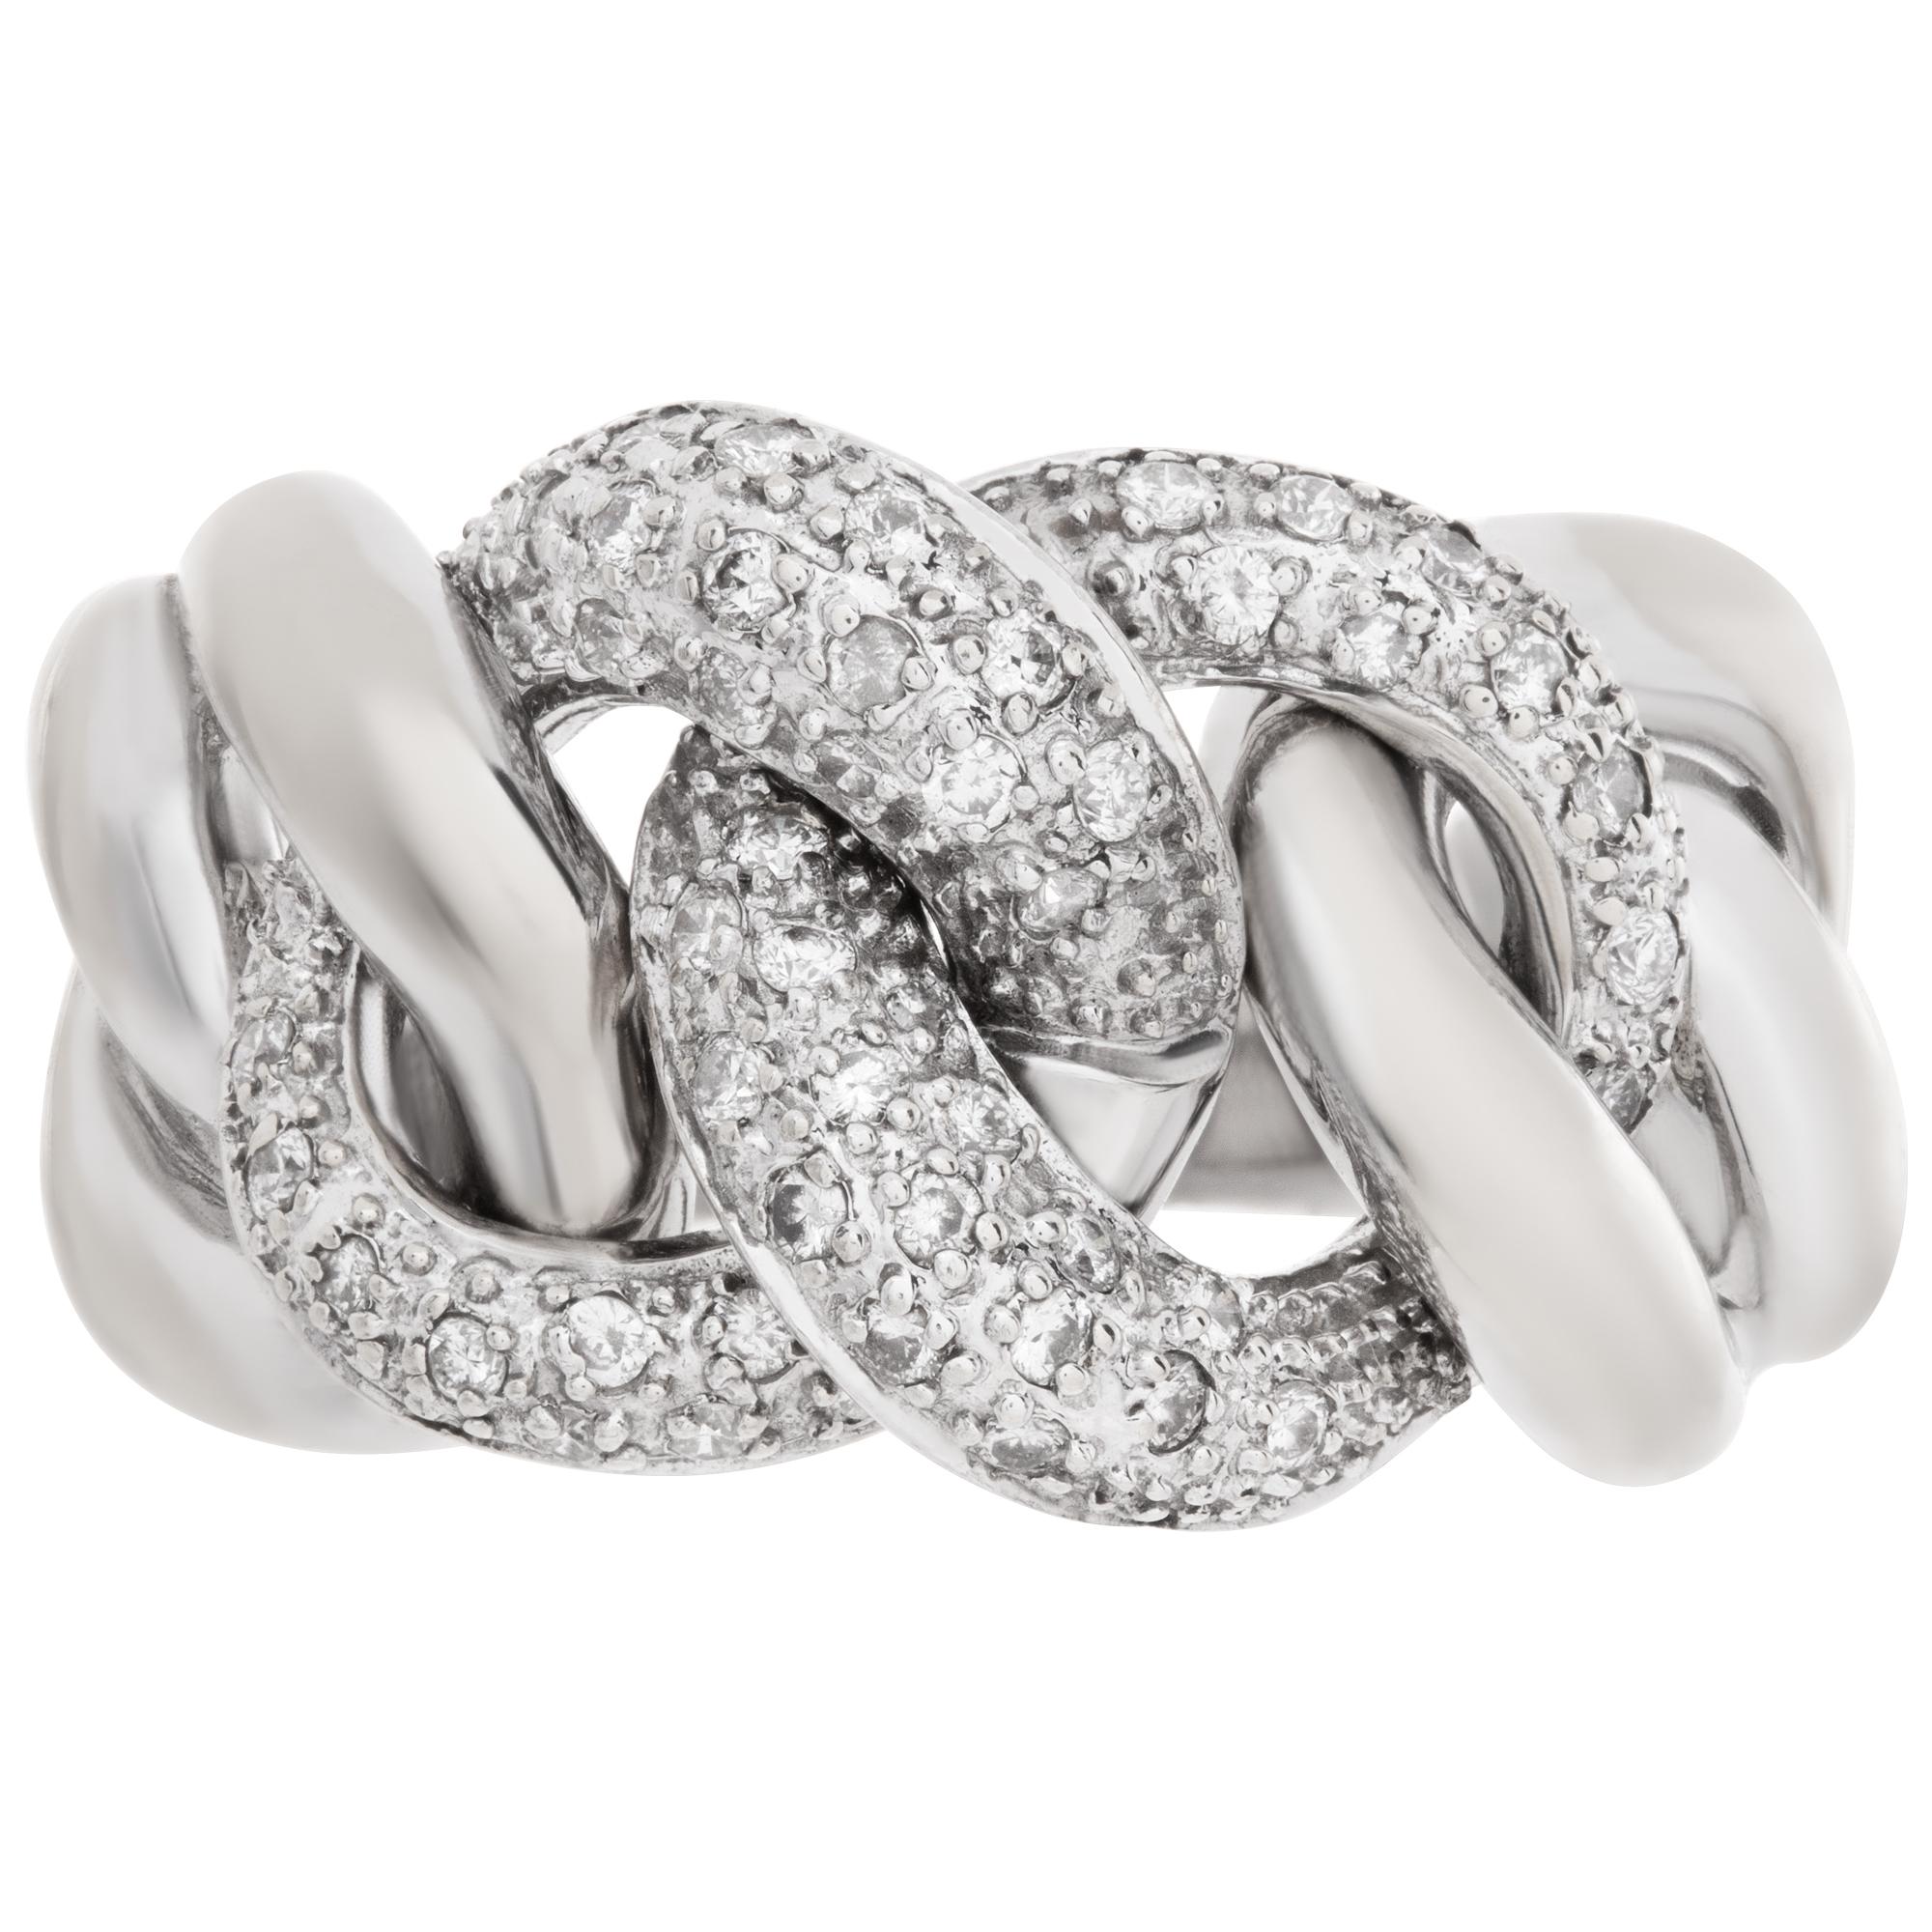 Pave Diamond link ring in 14k white gold with approximately 0.50 carats in diamonds. Size 8.This Diamond ring is currently size 8 and some items can be sized up or down, please ask! It weighs 7.3 pennyweights and is 14k.
